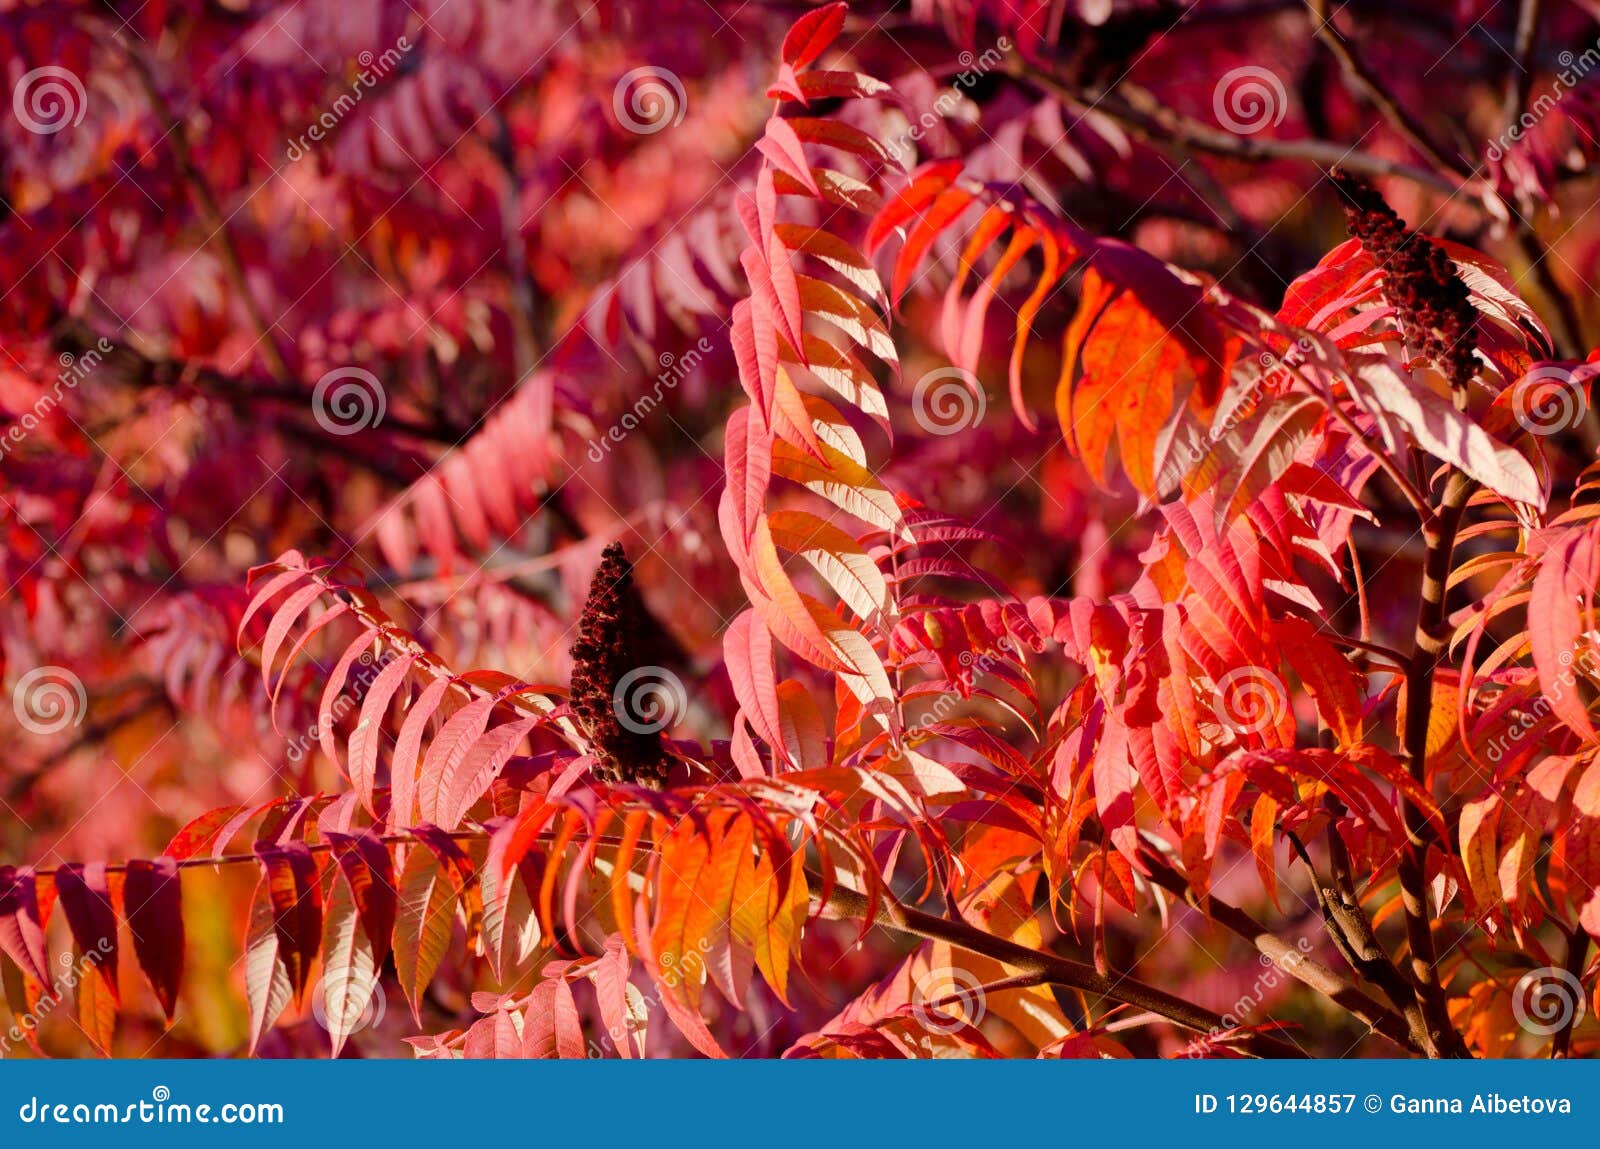 Autumn Tree With Big Bright Red Leaves Stock Image Image Of Maple Landscape